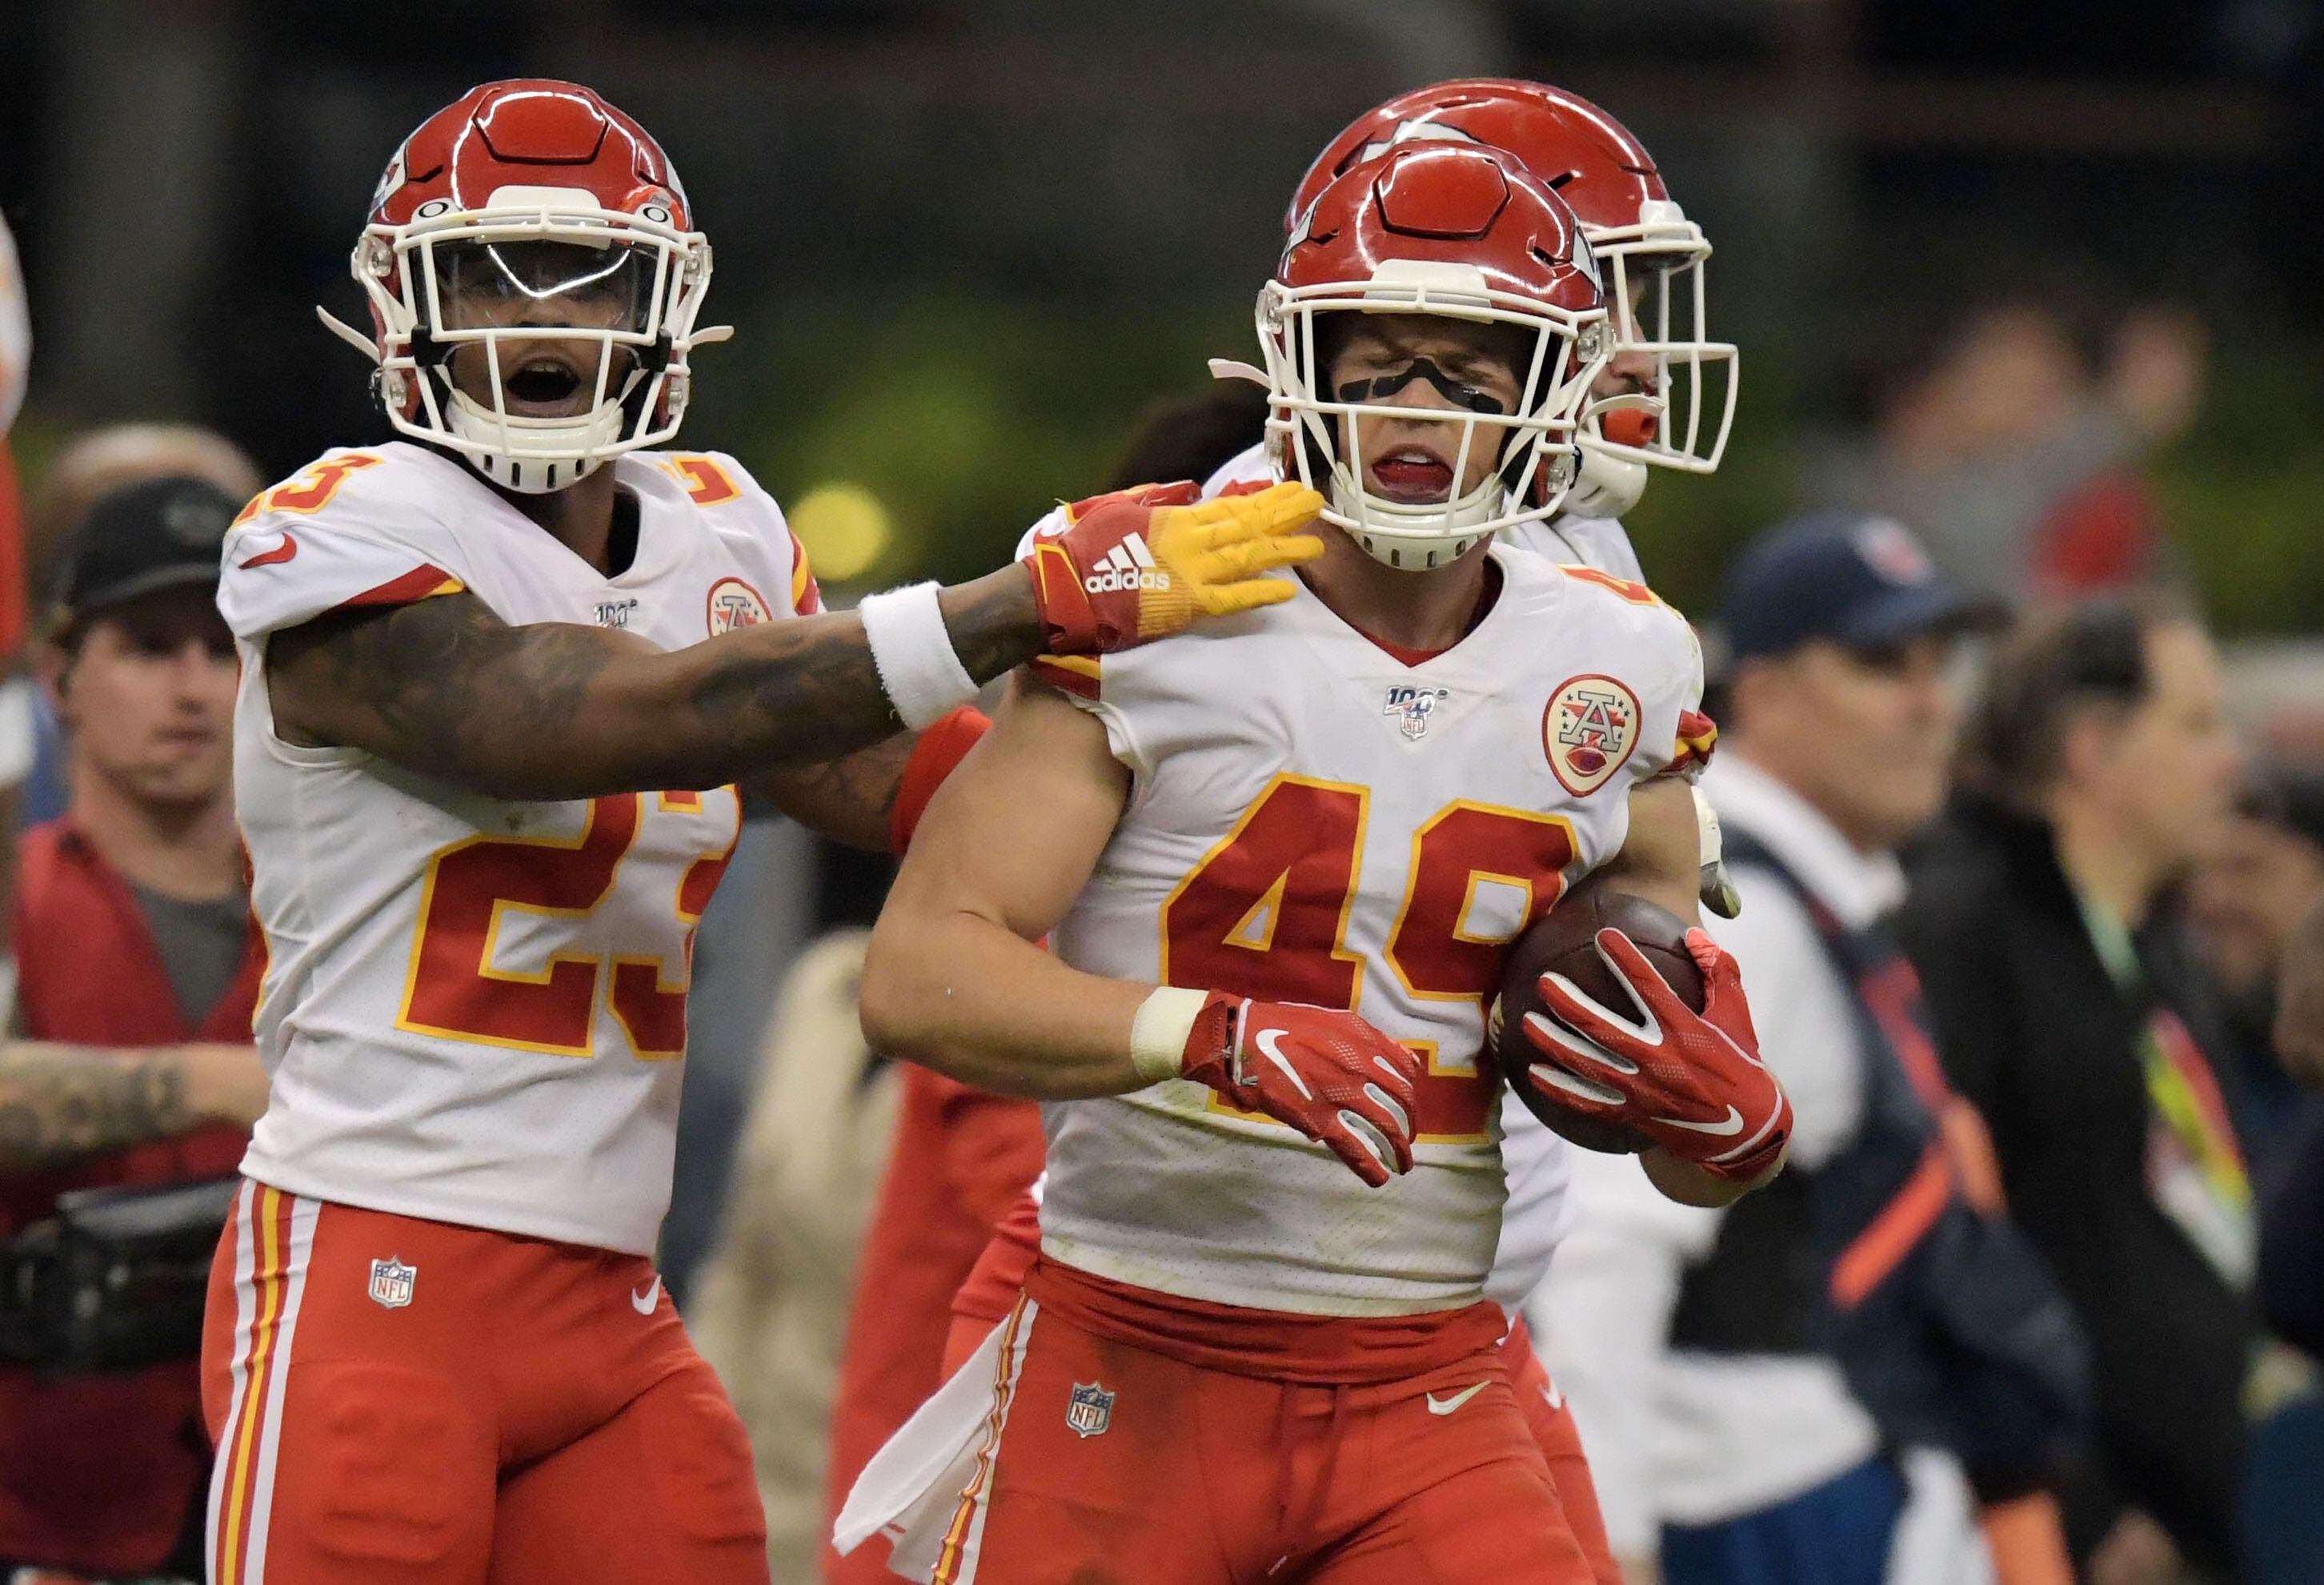 Nov 18, 2019; Mexico City, MEX;  Kansas City Chiefs defensive back Daniel Sorensen (49) celebrates with defensive back Armani Watts (23) after intercepting a pass in the final minute against the Los Angeles Chargers during an NFL International Series game at Estadio Azteca. The Chiefs defeated the Chargers 24-17. Mandatory Credit: Kirby Lee-USA TODAY Sports